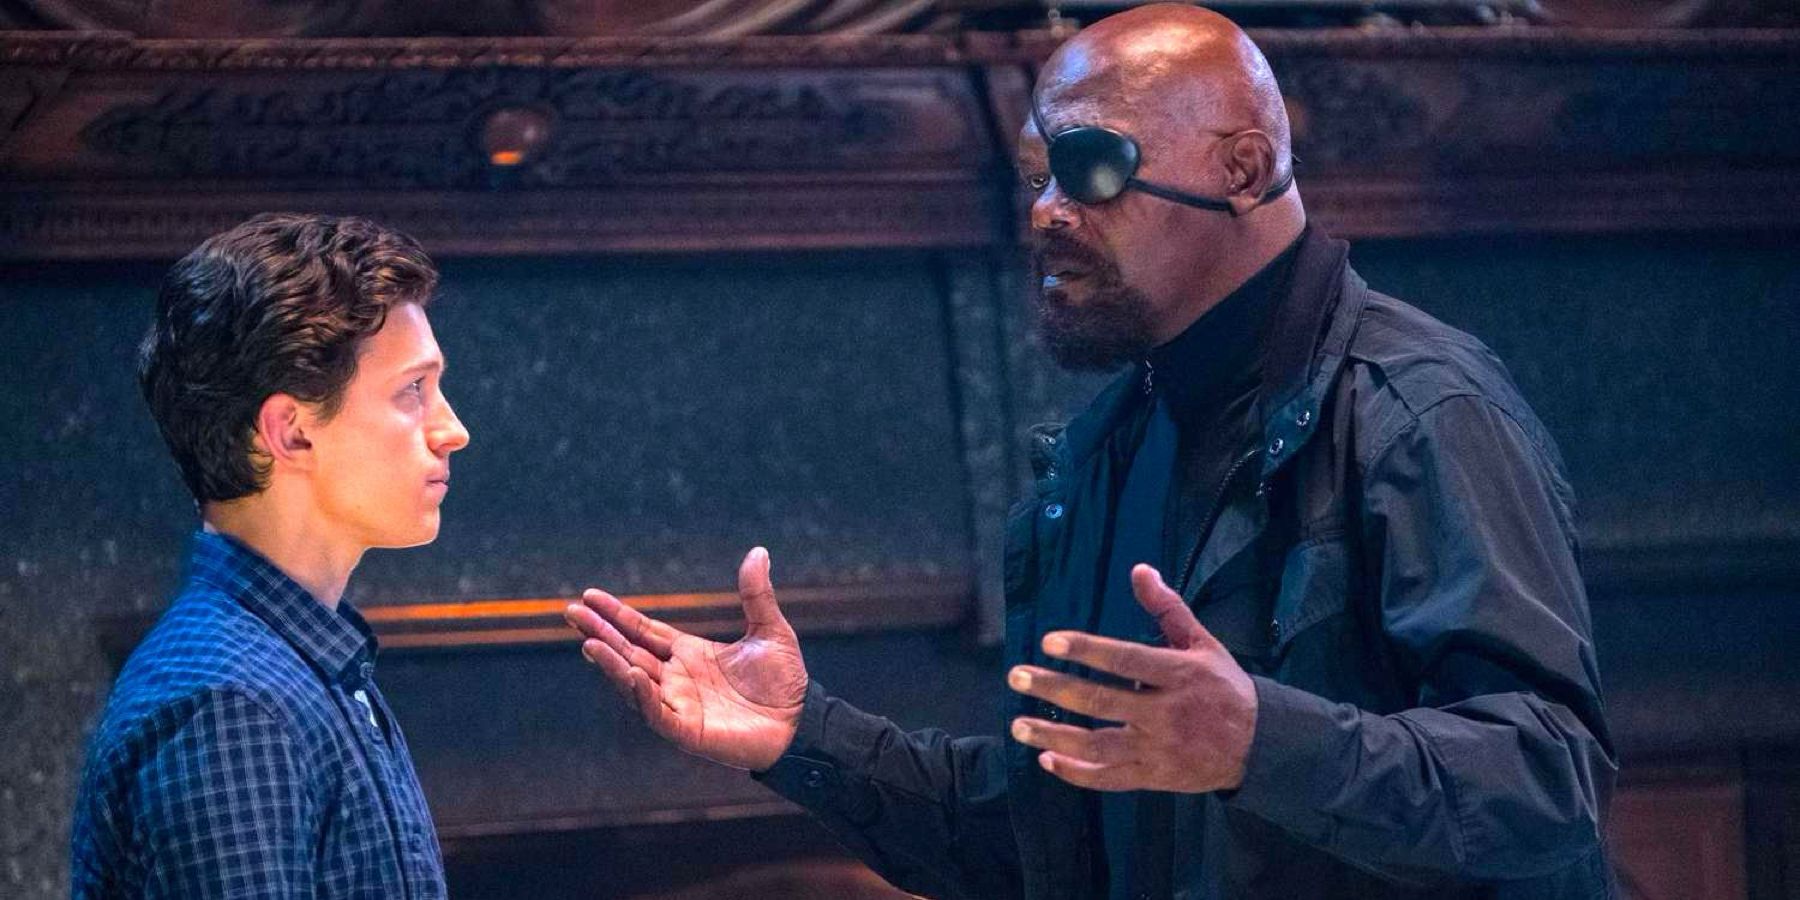 Peter Parker (played by actor Tom Holland) and Nick Fury (played by actor Samuel L. Jackson), share a tense conversation in front of a fireplace in Spider-Man: Far From Home.